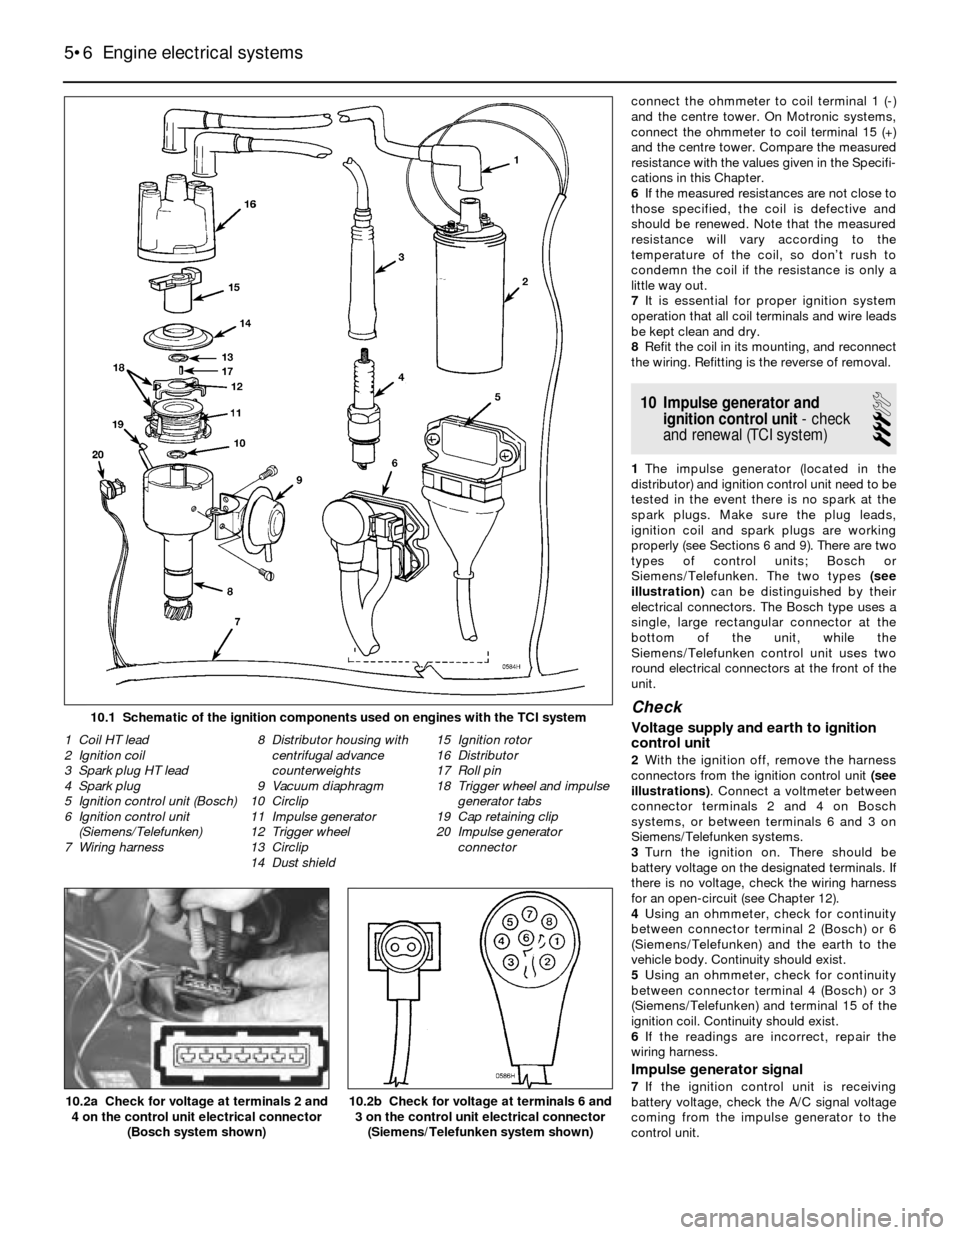 BMW 3 SERIES 1985 E30 Service Manual connect the ohmmeter to coil terminal 1 (-)
and the centre tower. On Motronic systems,
connect the ohmmeter to coil terminal 15 (+)
and the centre tower. Compare the measured
resistance with the value